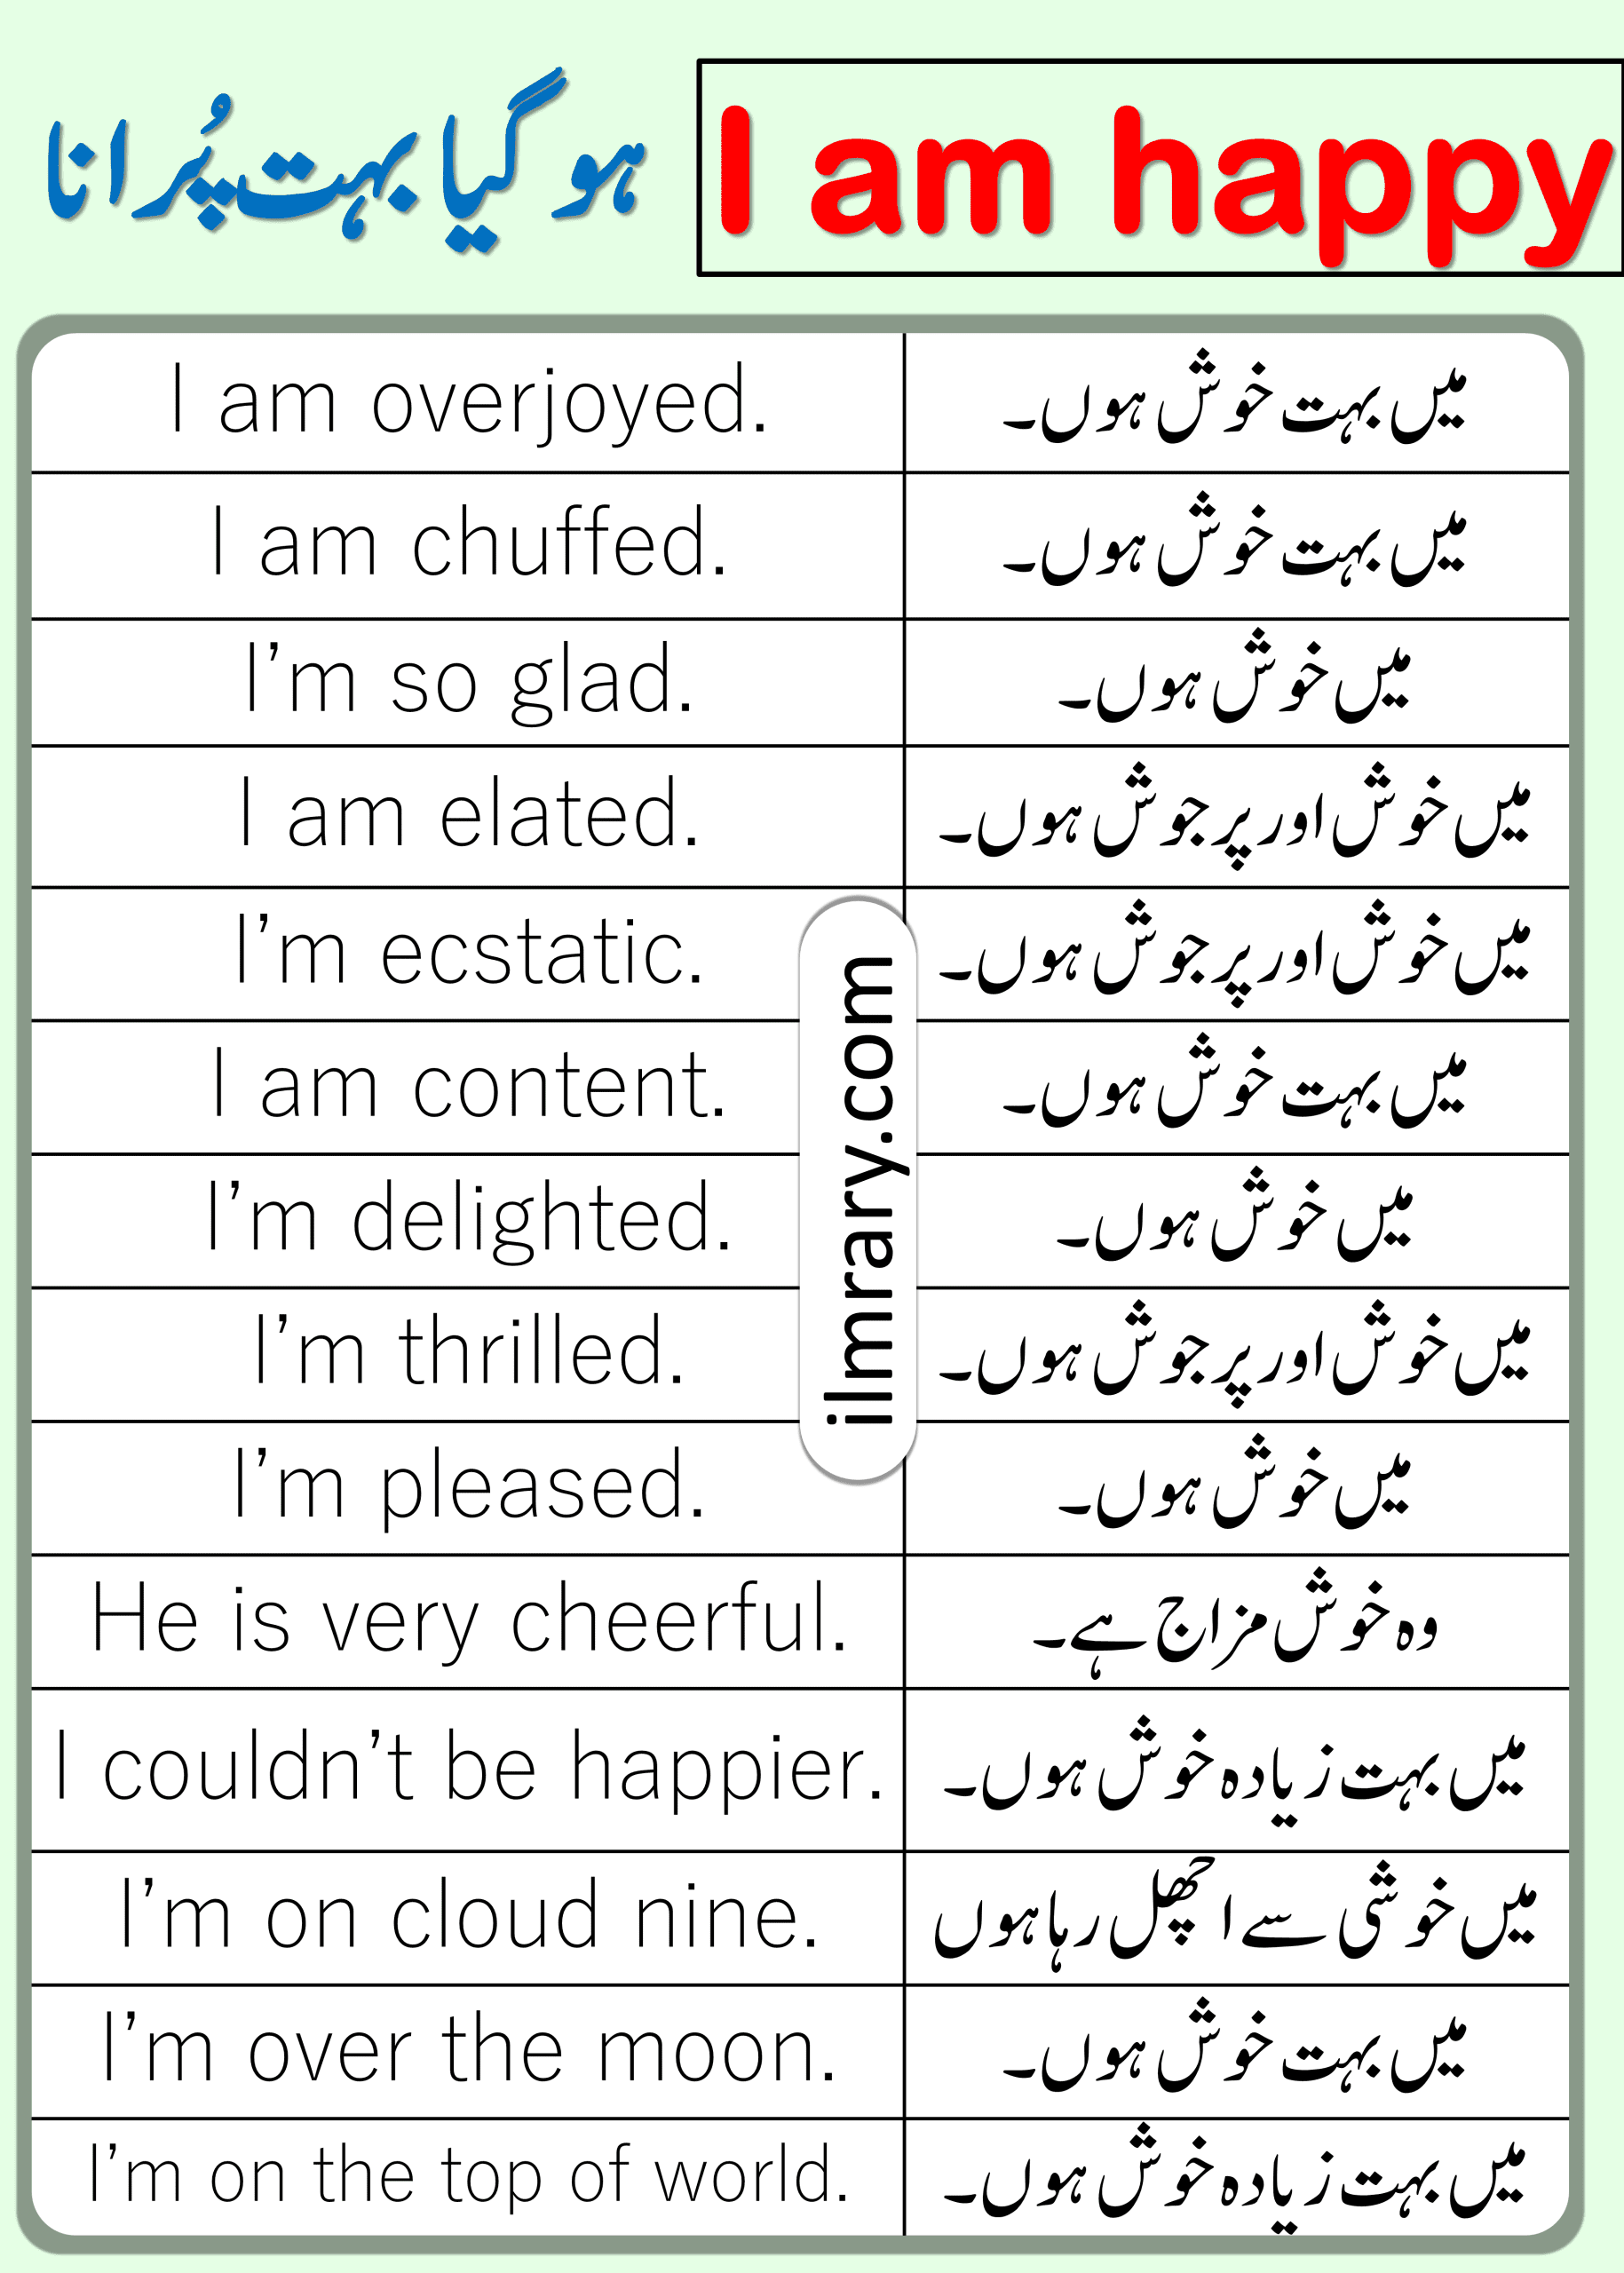 20 Different Ways to Say I AM HAPPY in English with Urdu Meanings